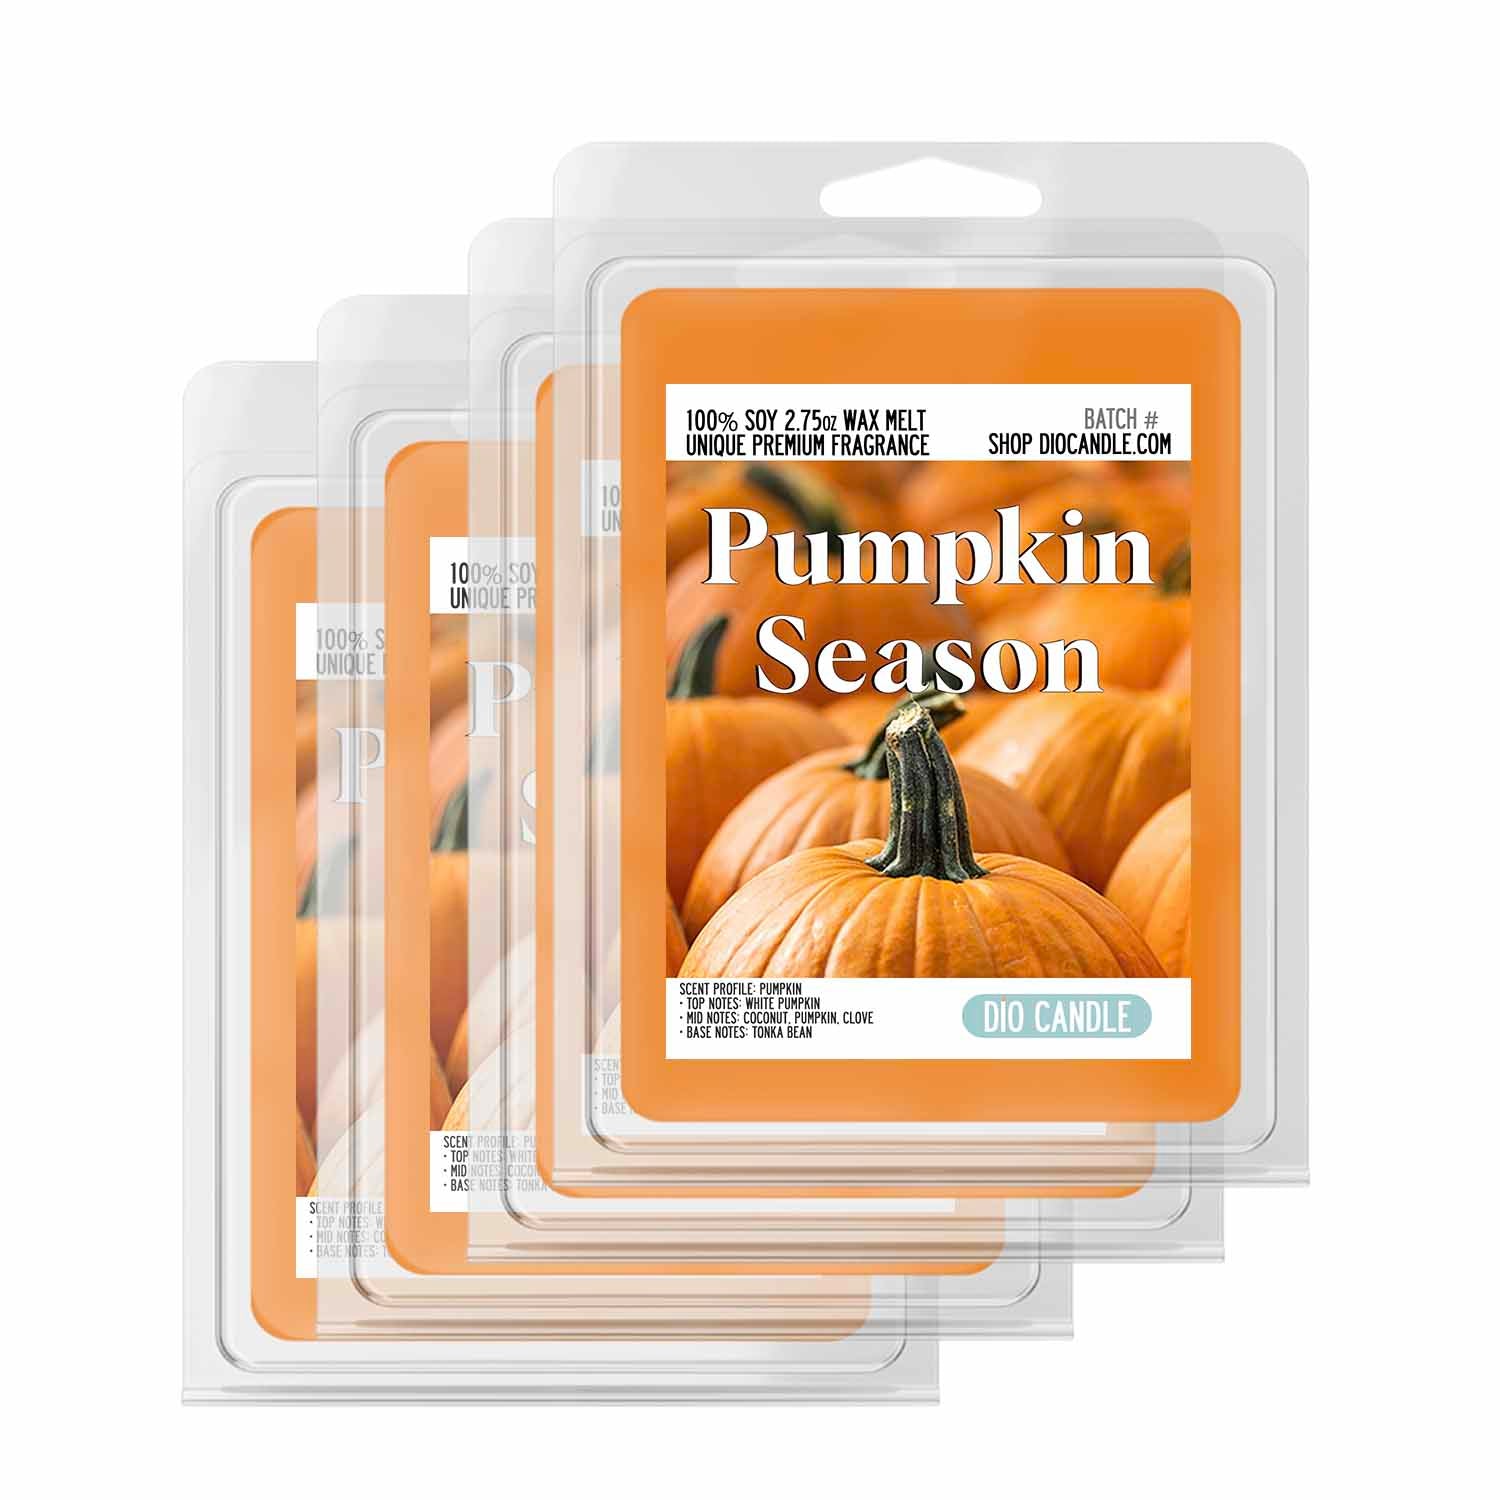 Happy Wax Spicy Pumpkin Scented Soy Wax Melts Collection 6 Oz. of Scented  Wax Melts, Made in USA Spicy Pumpkin 6 oz